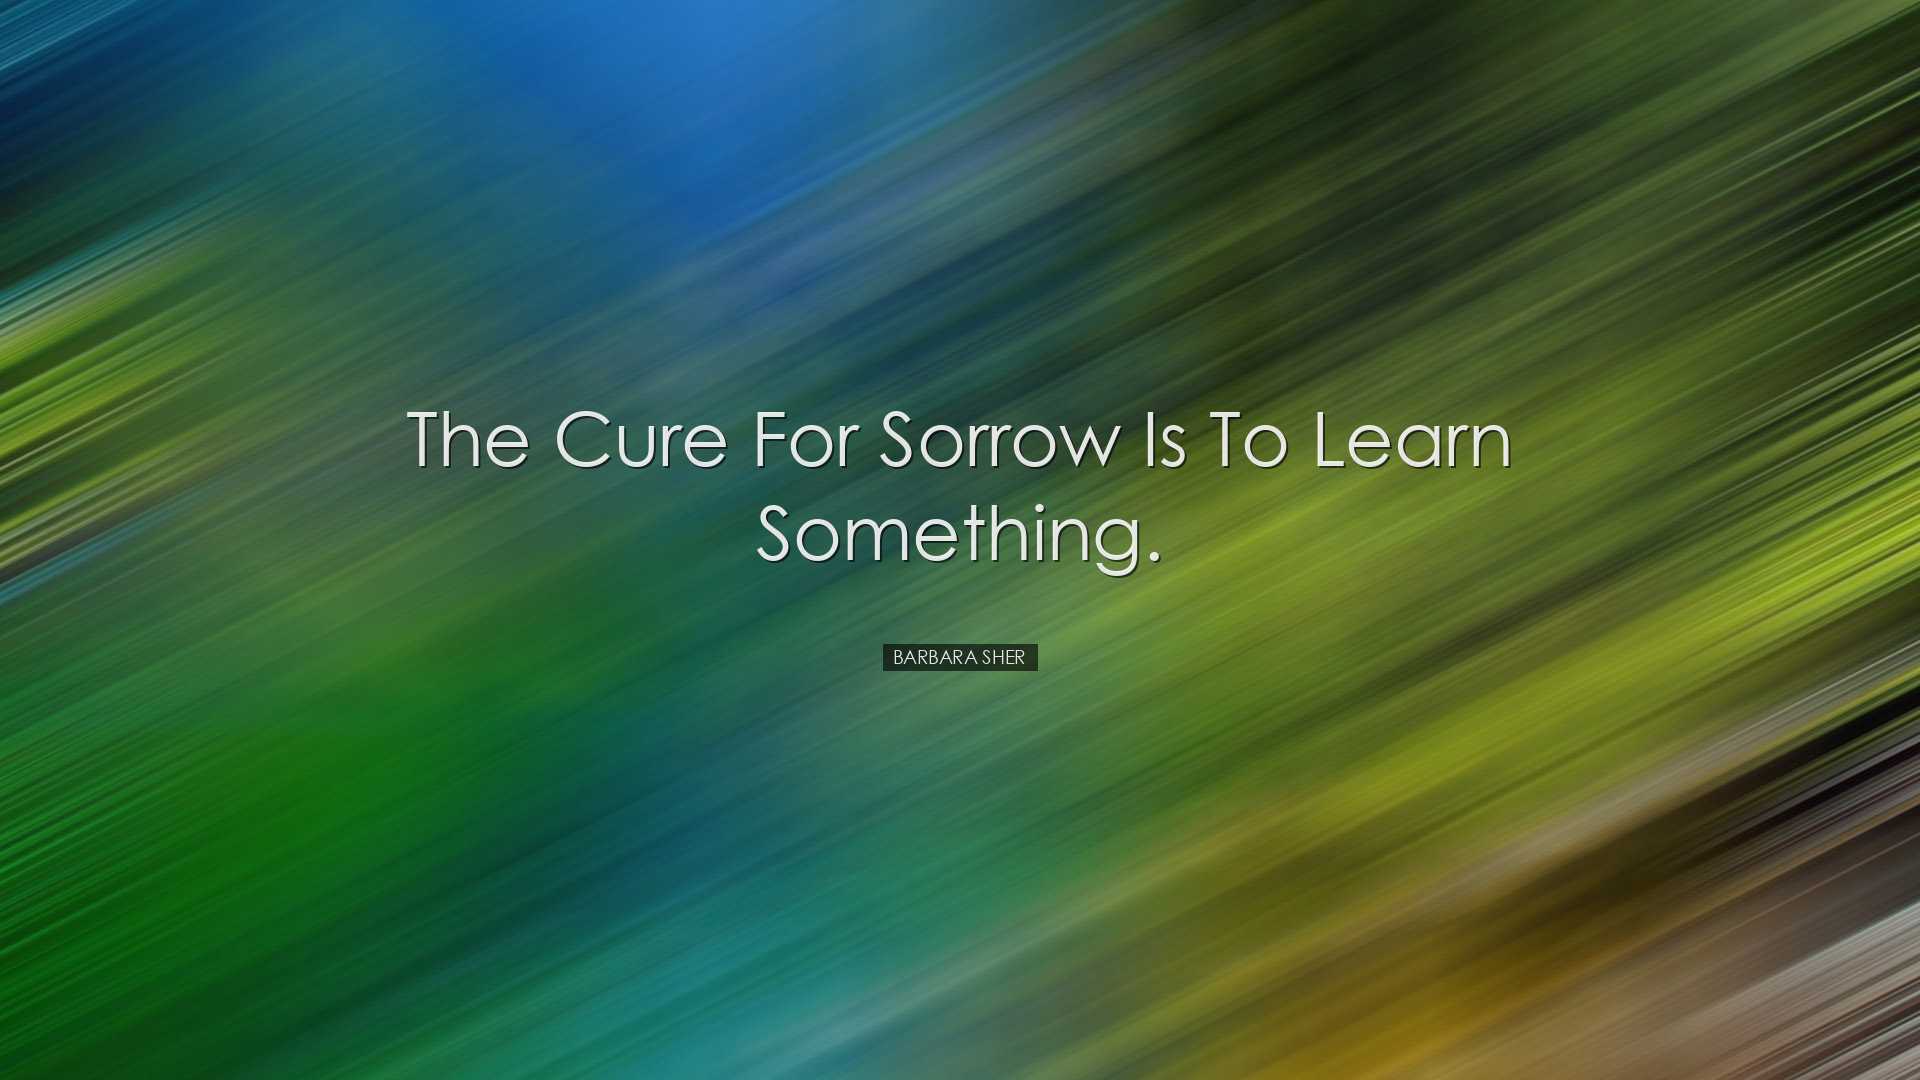 The cure for sorrow is to learn something. - Barbara Sher